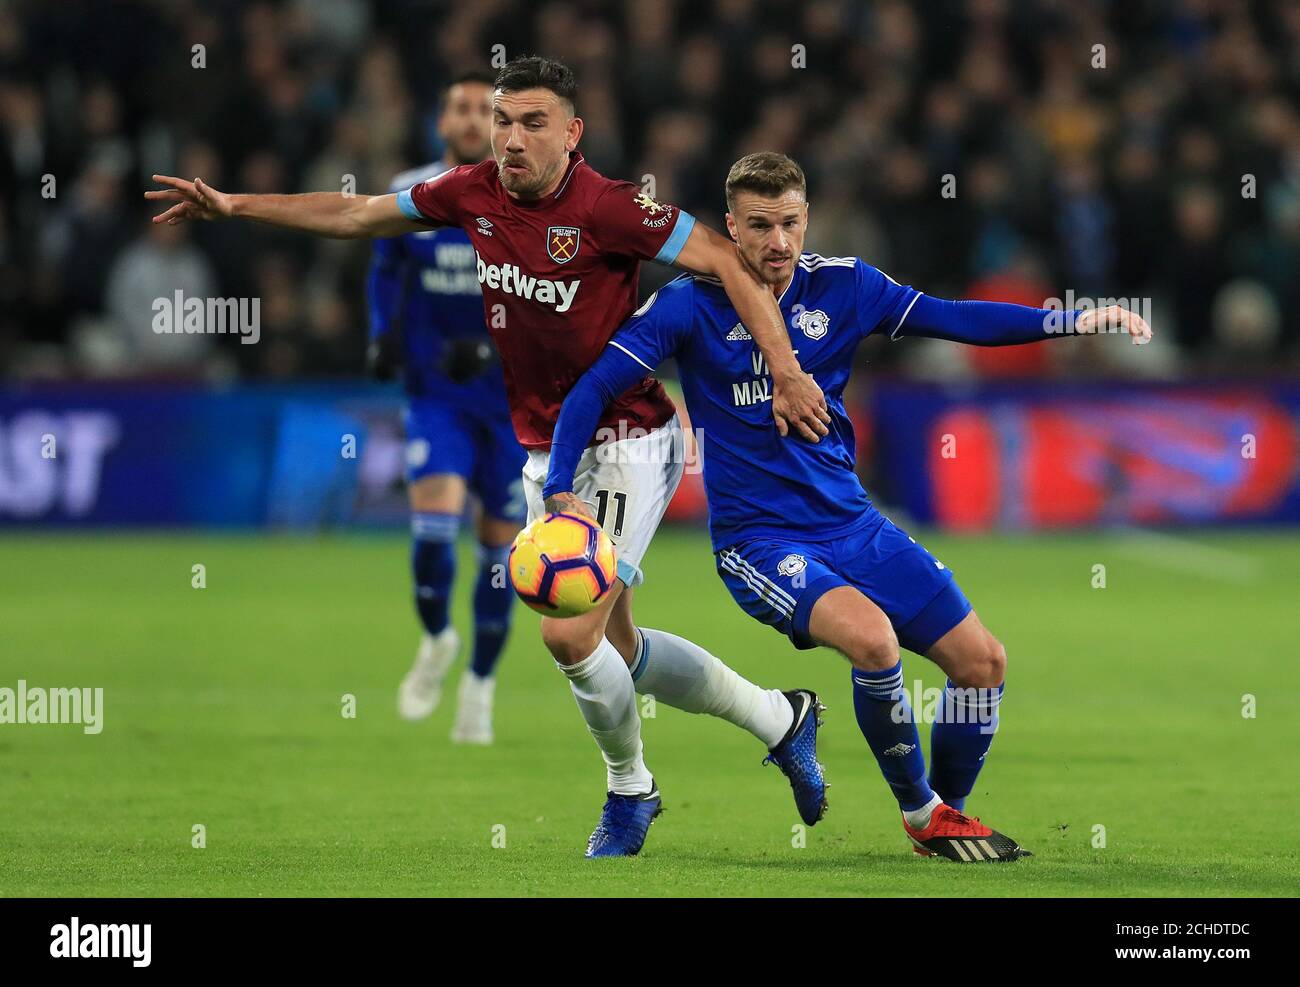 West Ham United's Robert Snodgrass (left) and Cardiff City's Joe Bennett battle for the ball during the Premier League match at the London Stadium. Stock Photo